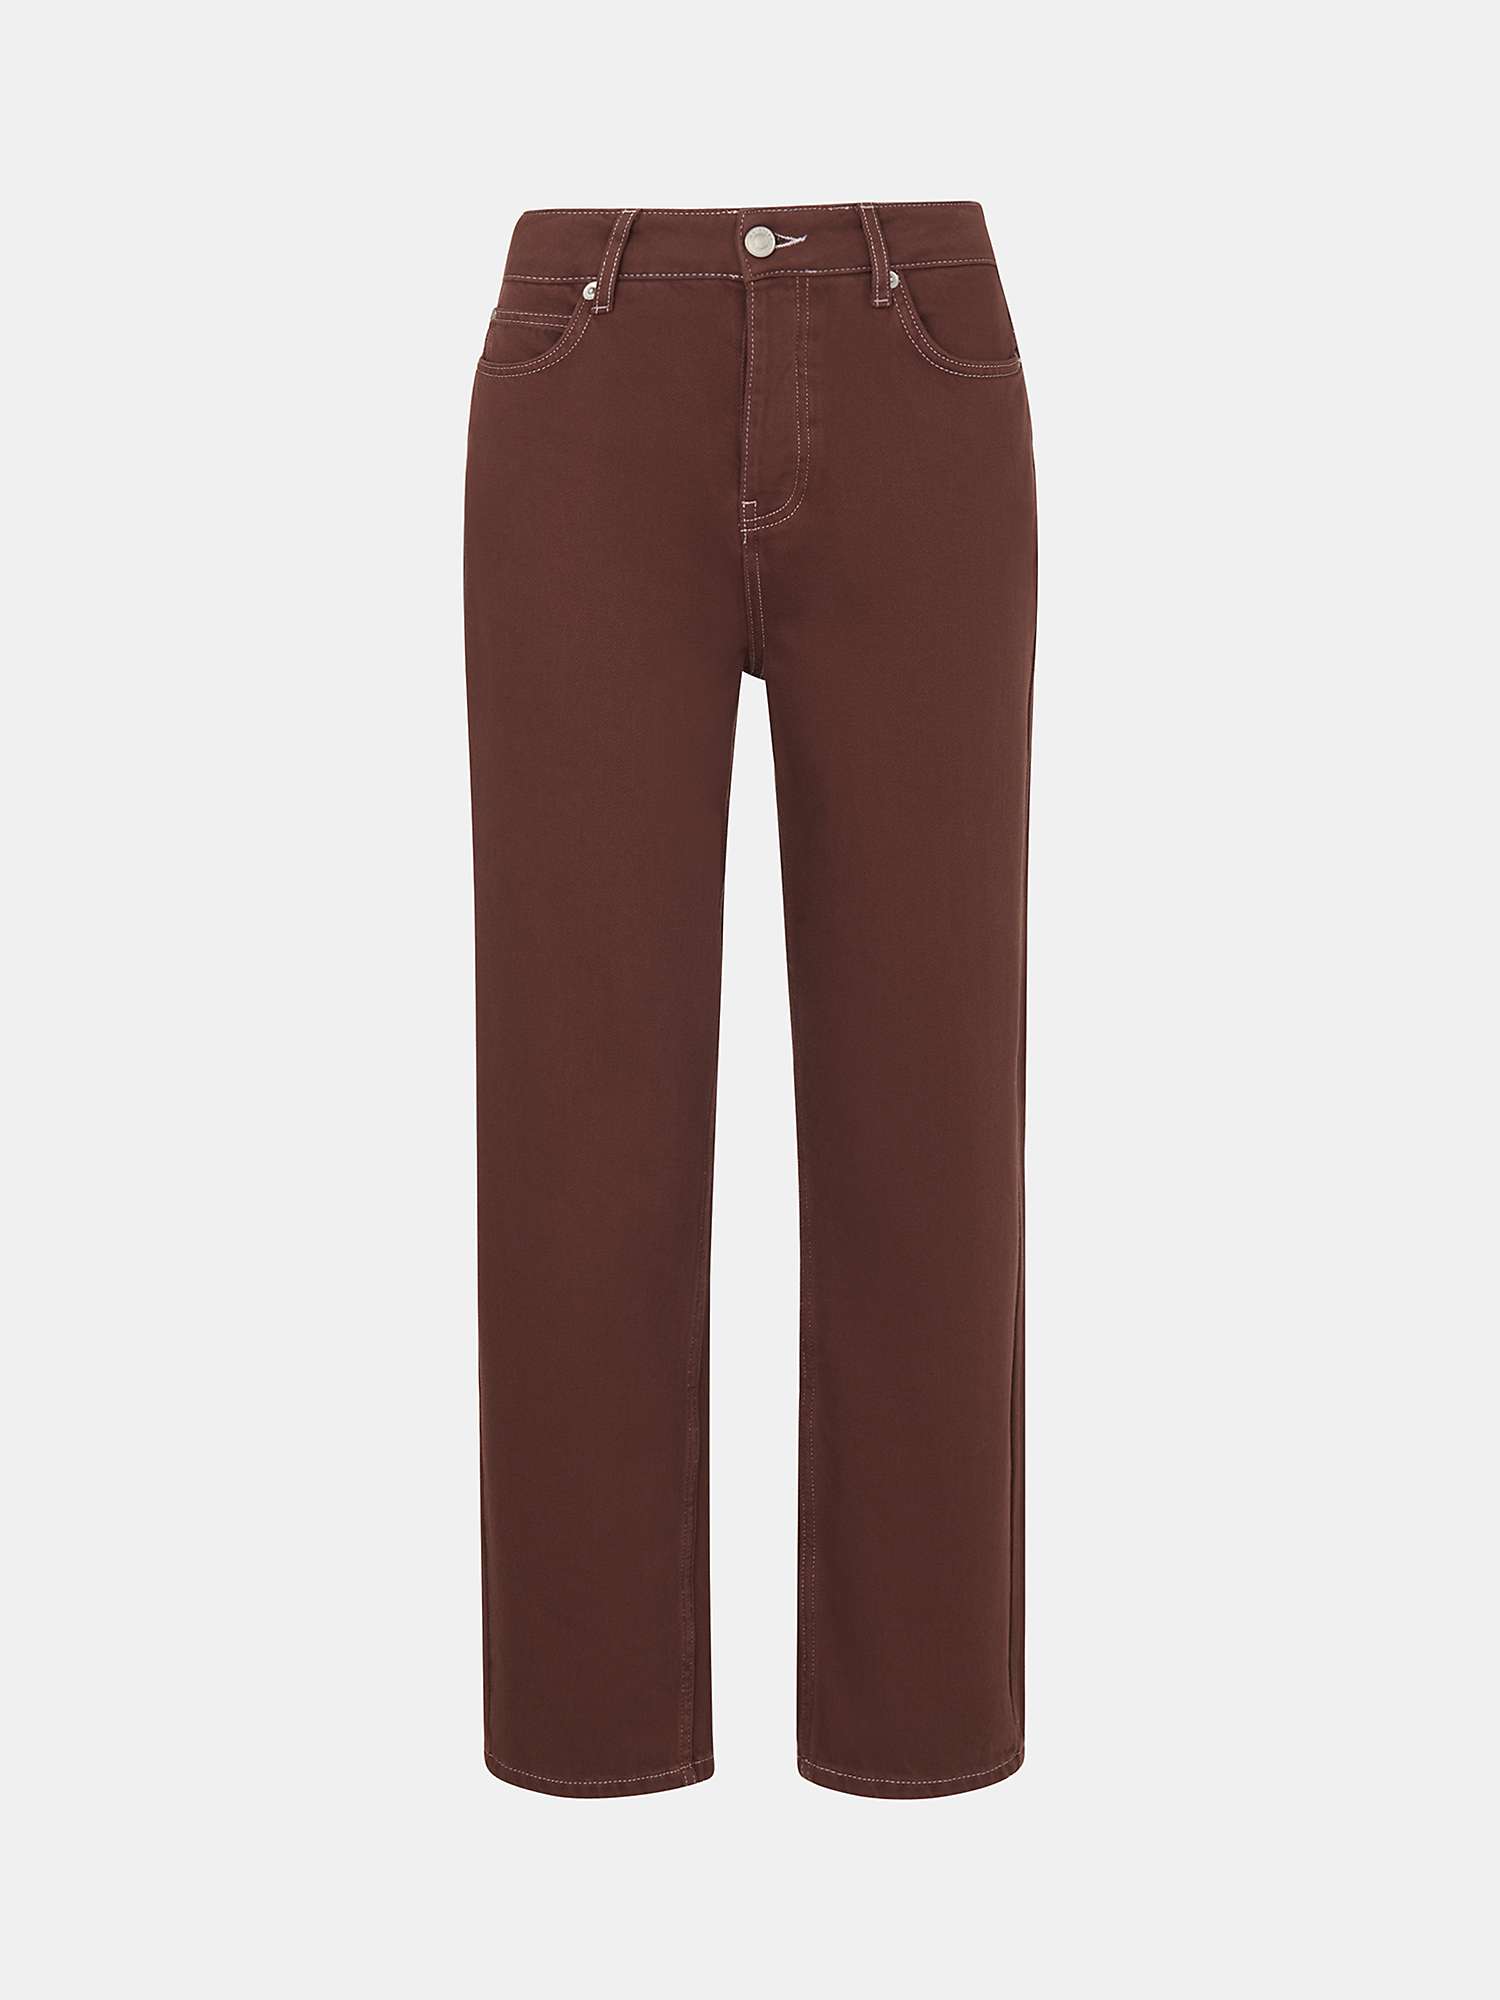 Buy Whistles Authentic Mollie Jeans, Chocolate Online at johnlewis.com